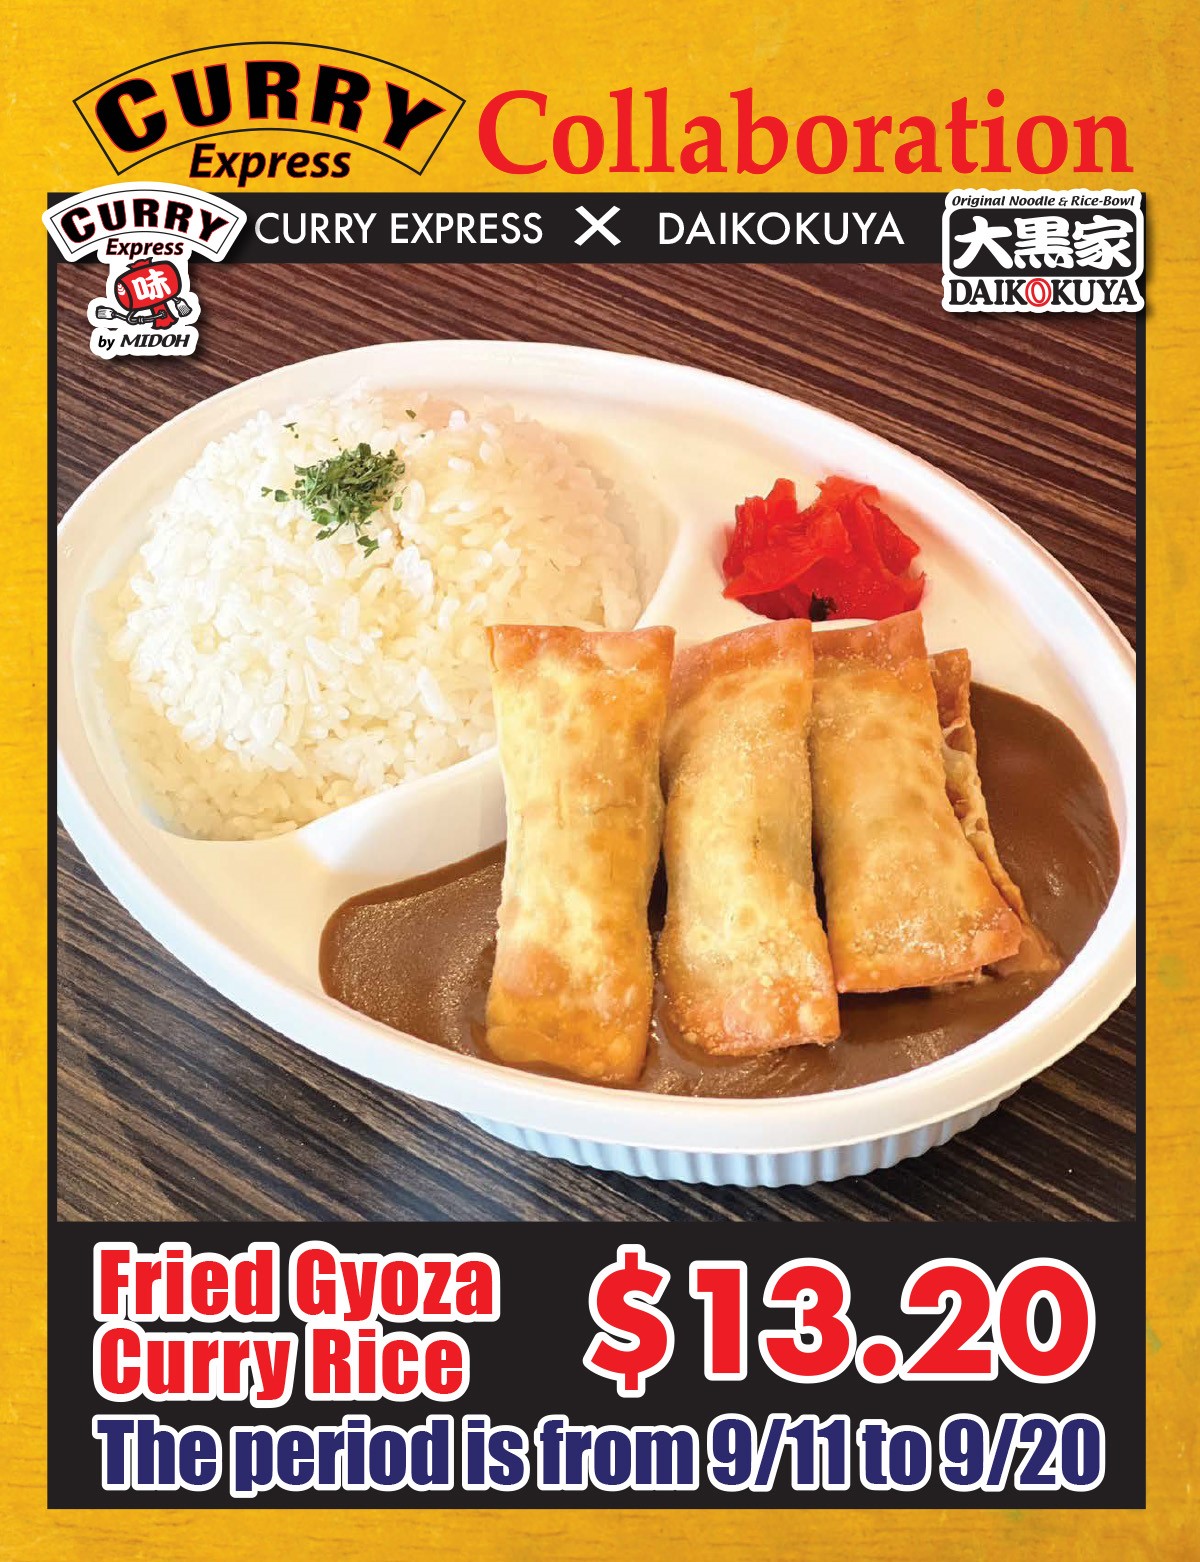 CURRY Express Collaboration CURRY EXPRESS X DAIKOKUYA Fried Gyoza $13.20 The period is from 9/11 to 9/20